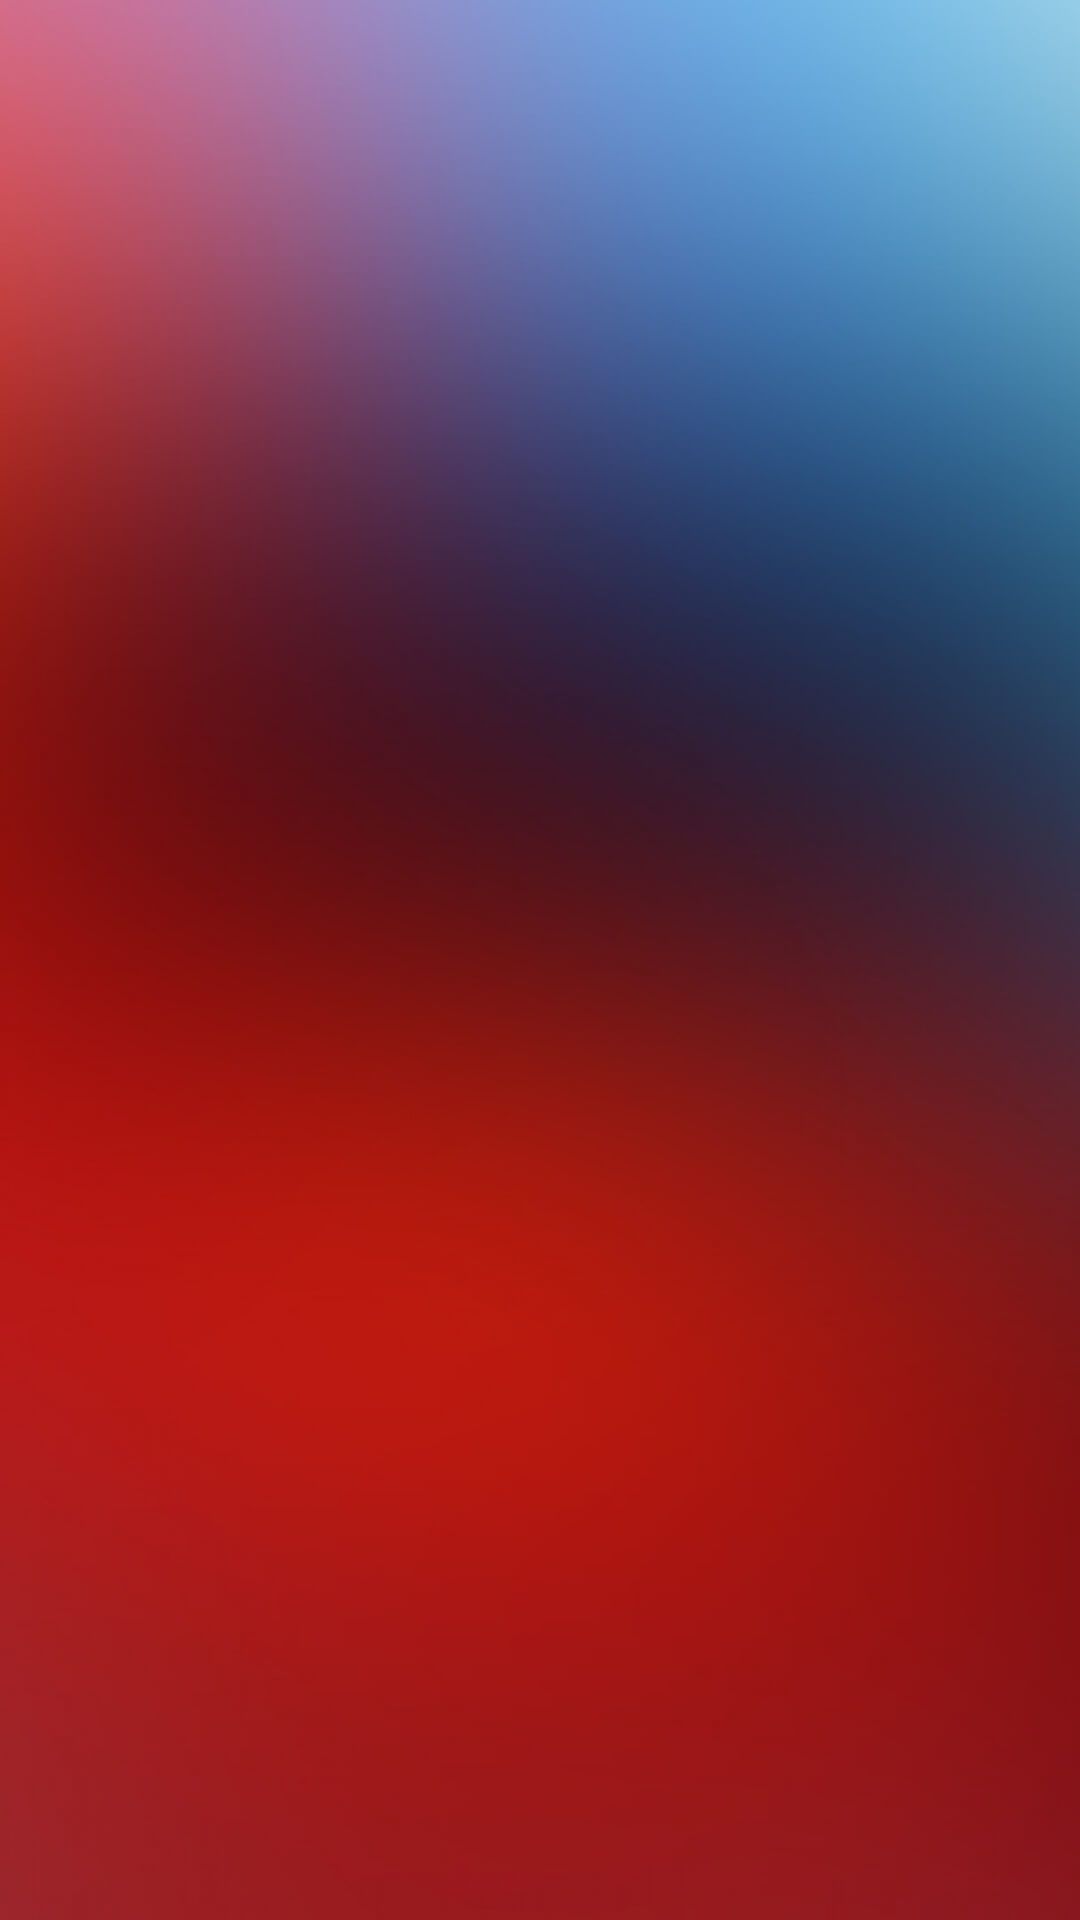 Blur wallpaper background in red white and blue cool modern simple and  minimalist 13856382 Stock Photo at Vecteezy